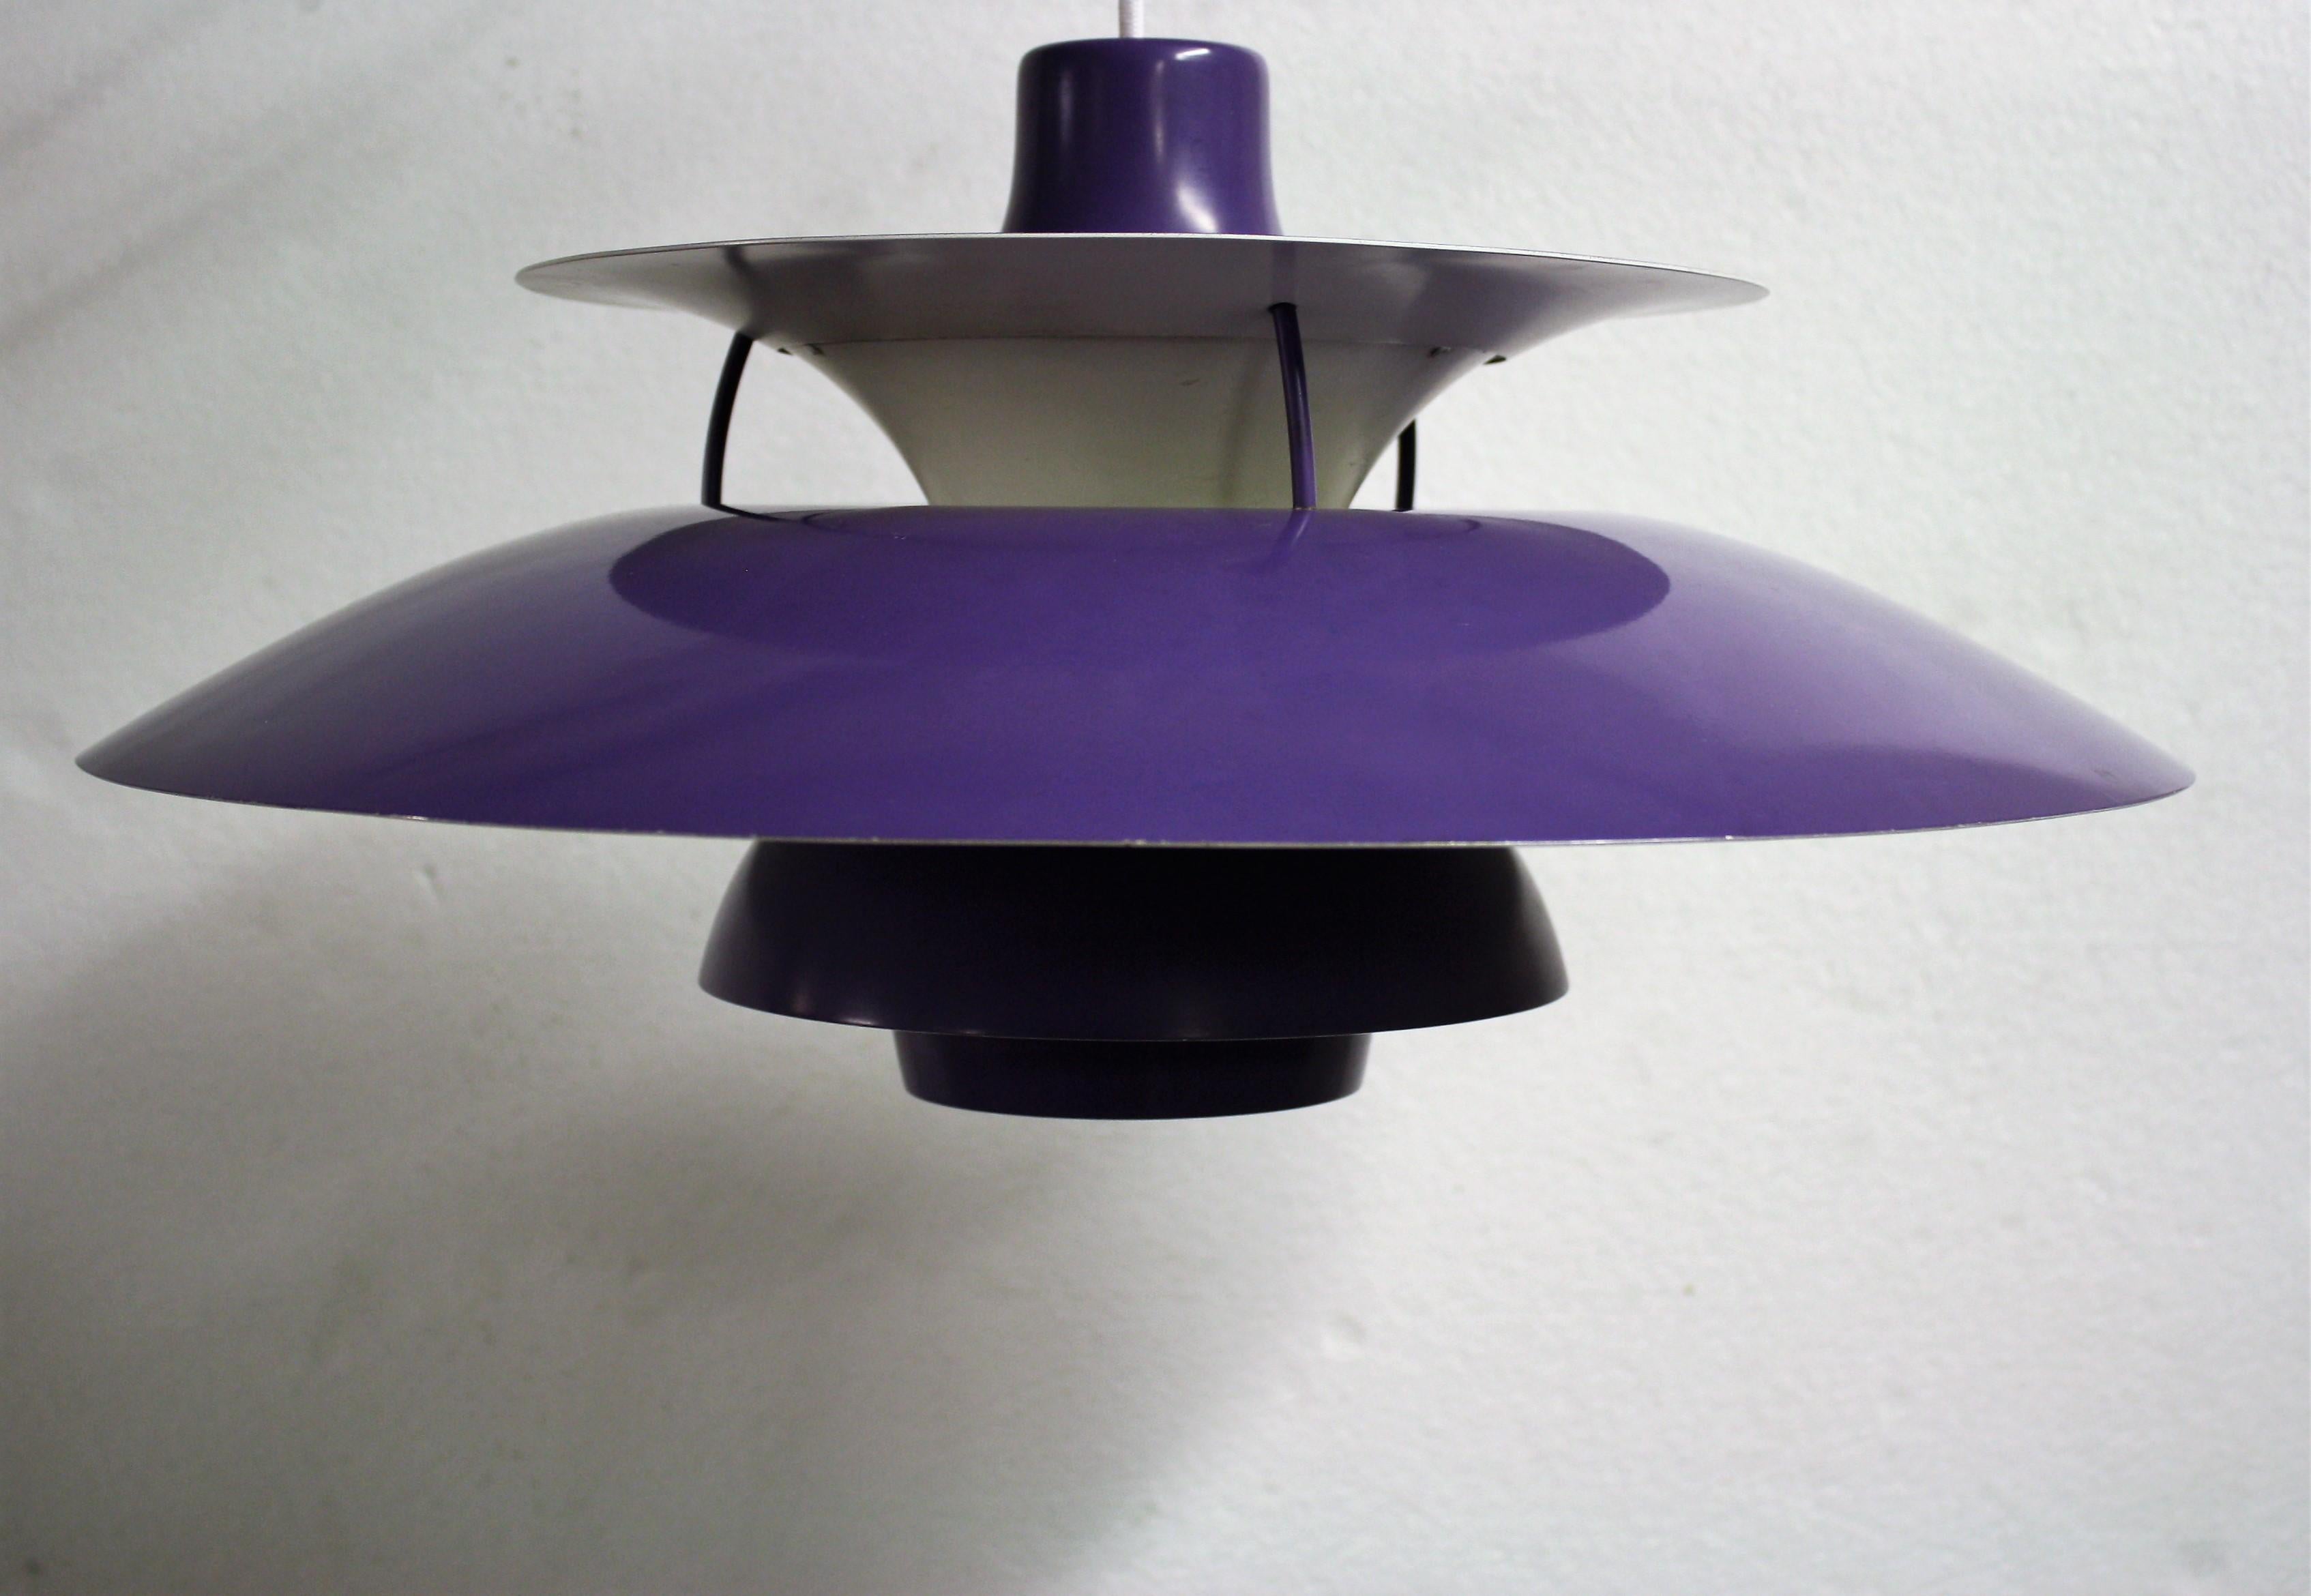 Design Classic Poul Henningsen PH5/3 pendant light designed by Louis Poulsen.

This purple lacquered 1970s example is in good condition with no dents.

Rewired and tested. Comes with the original porcelain E27/E26 light bulb holder.

1970s -